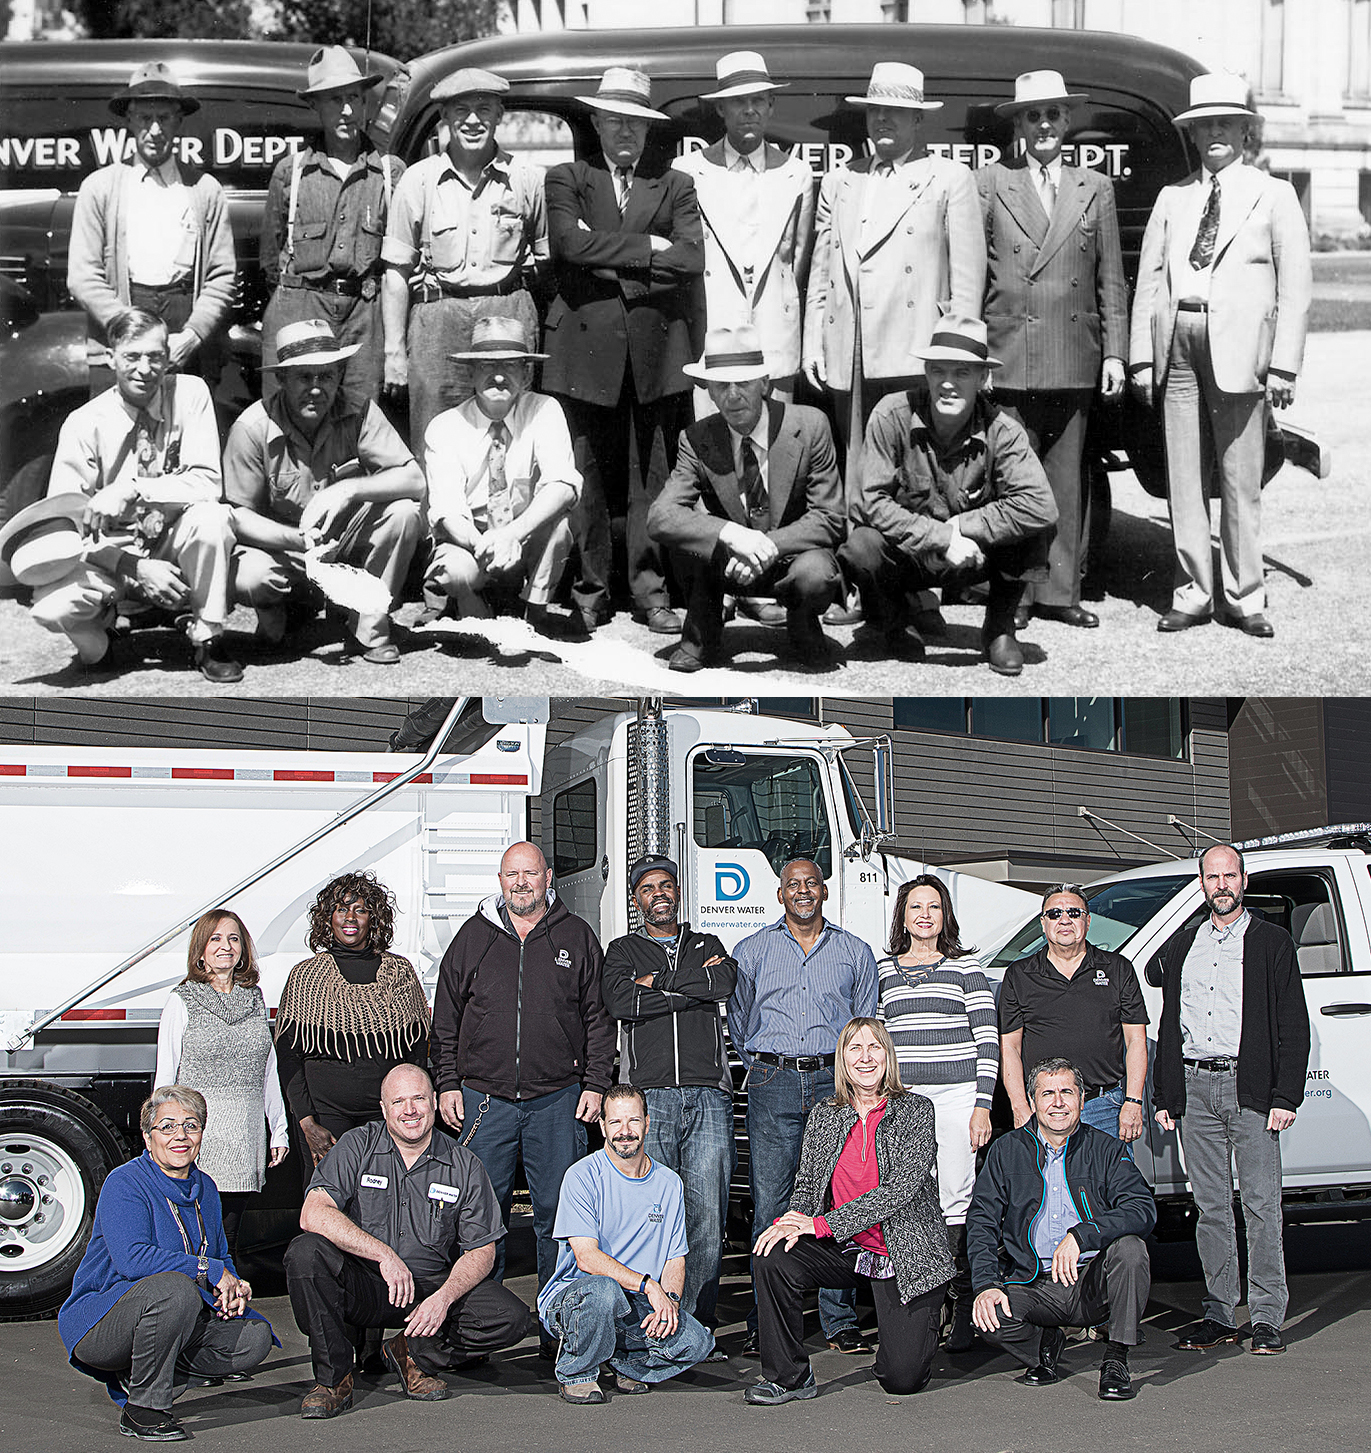 Denver Water fleet crews in the 1930s (top) and a 2018 photo reenactment with current employees.